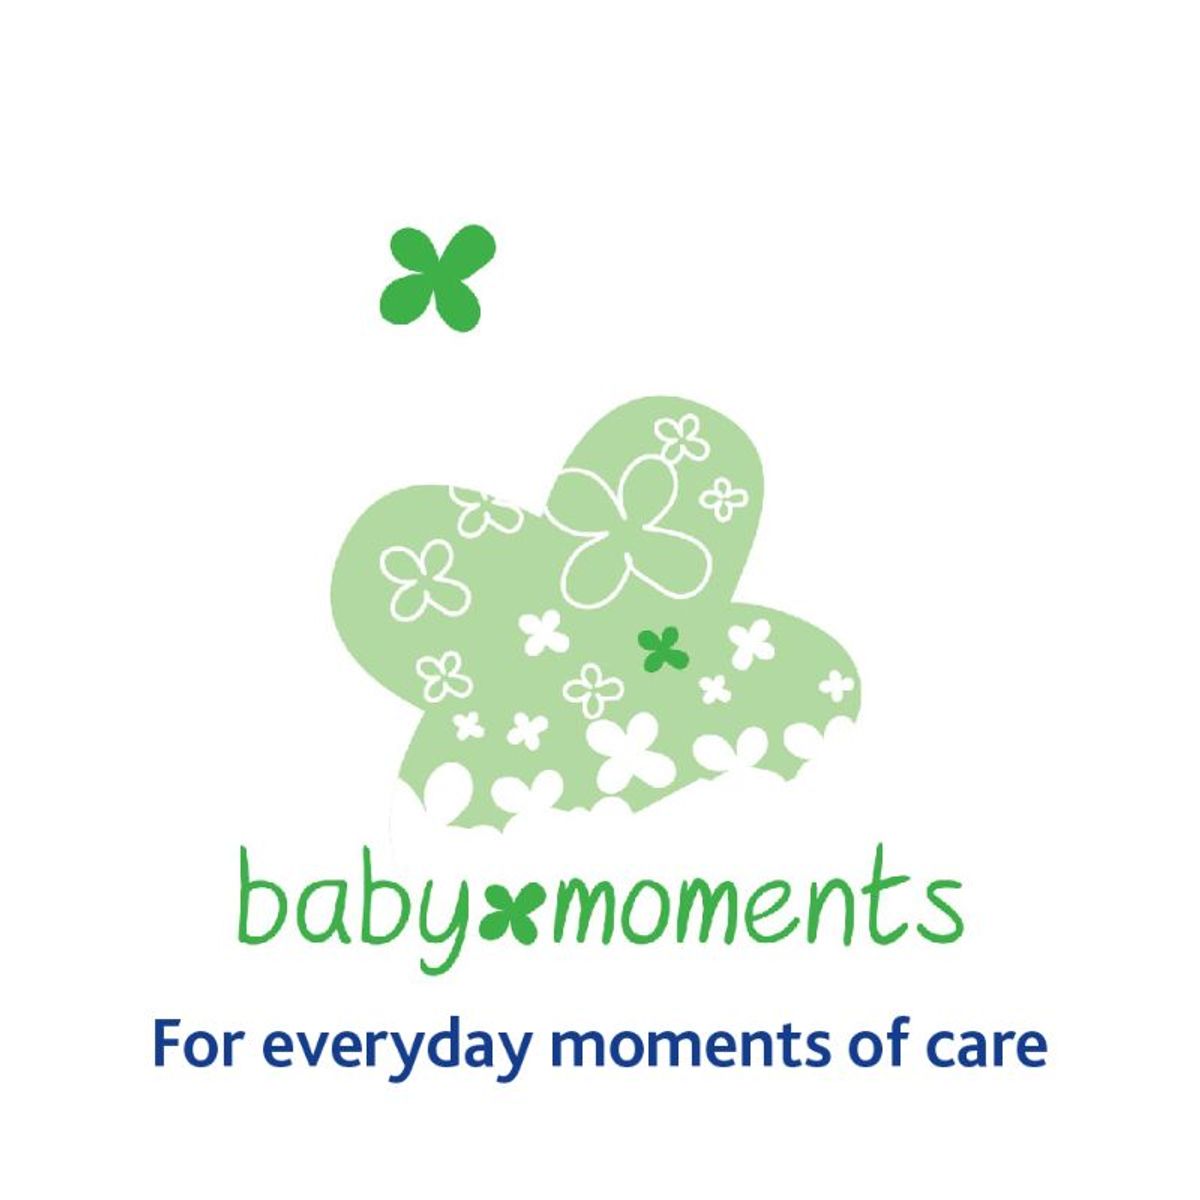 Chicco Baby Moments Soft Cleansing Wipes (72 pc x 2) Chicco